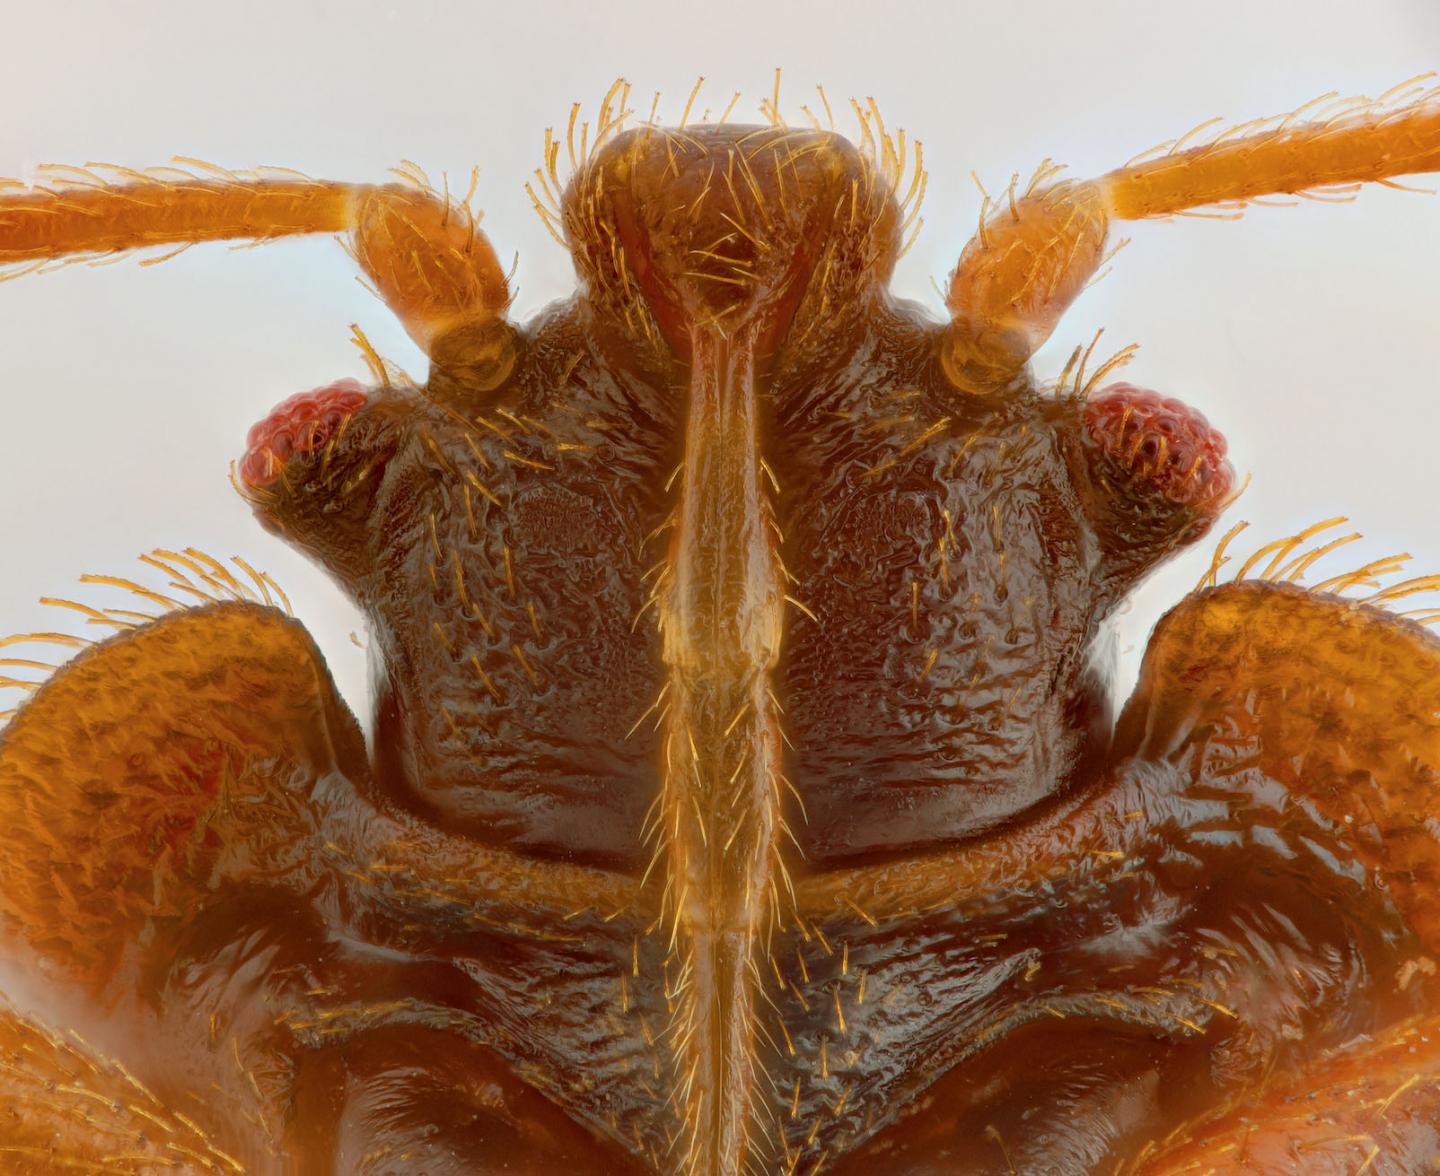 This is an image of a bed bug.